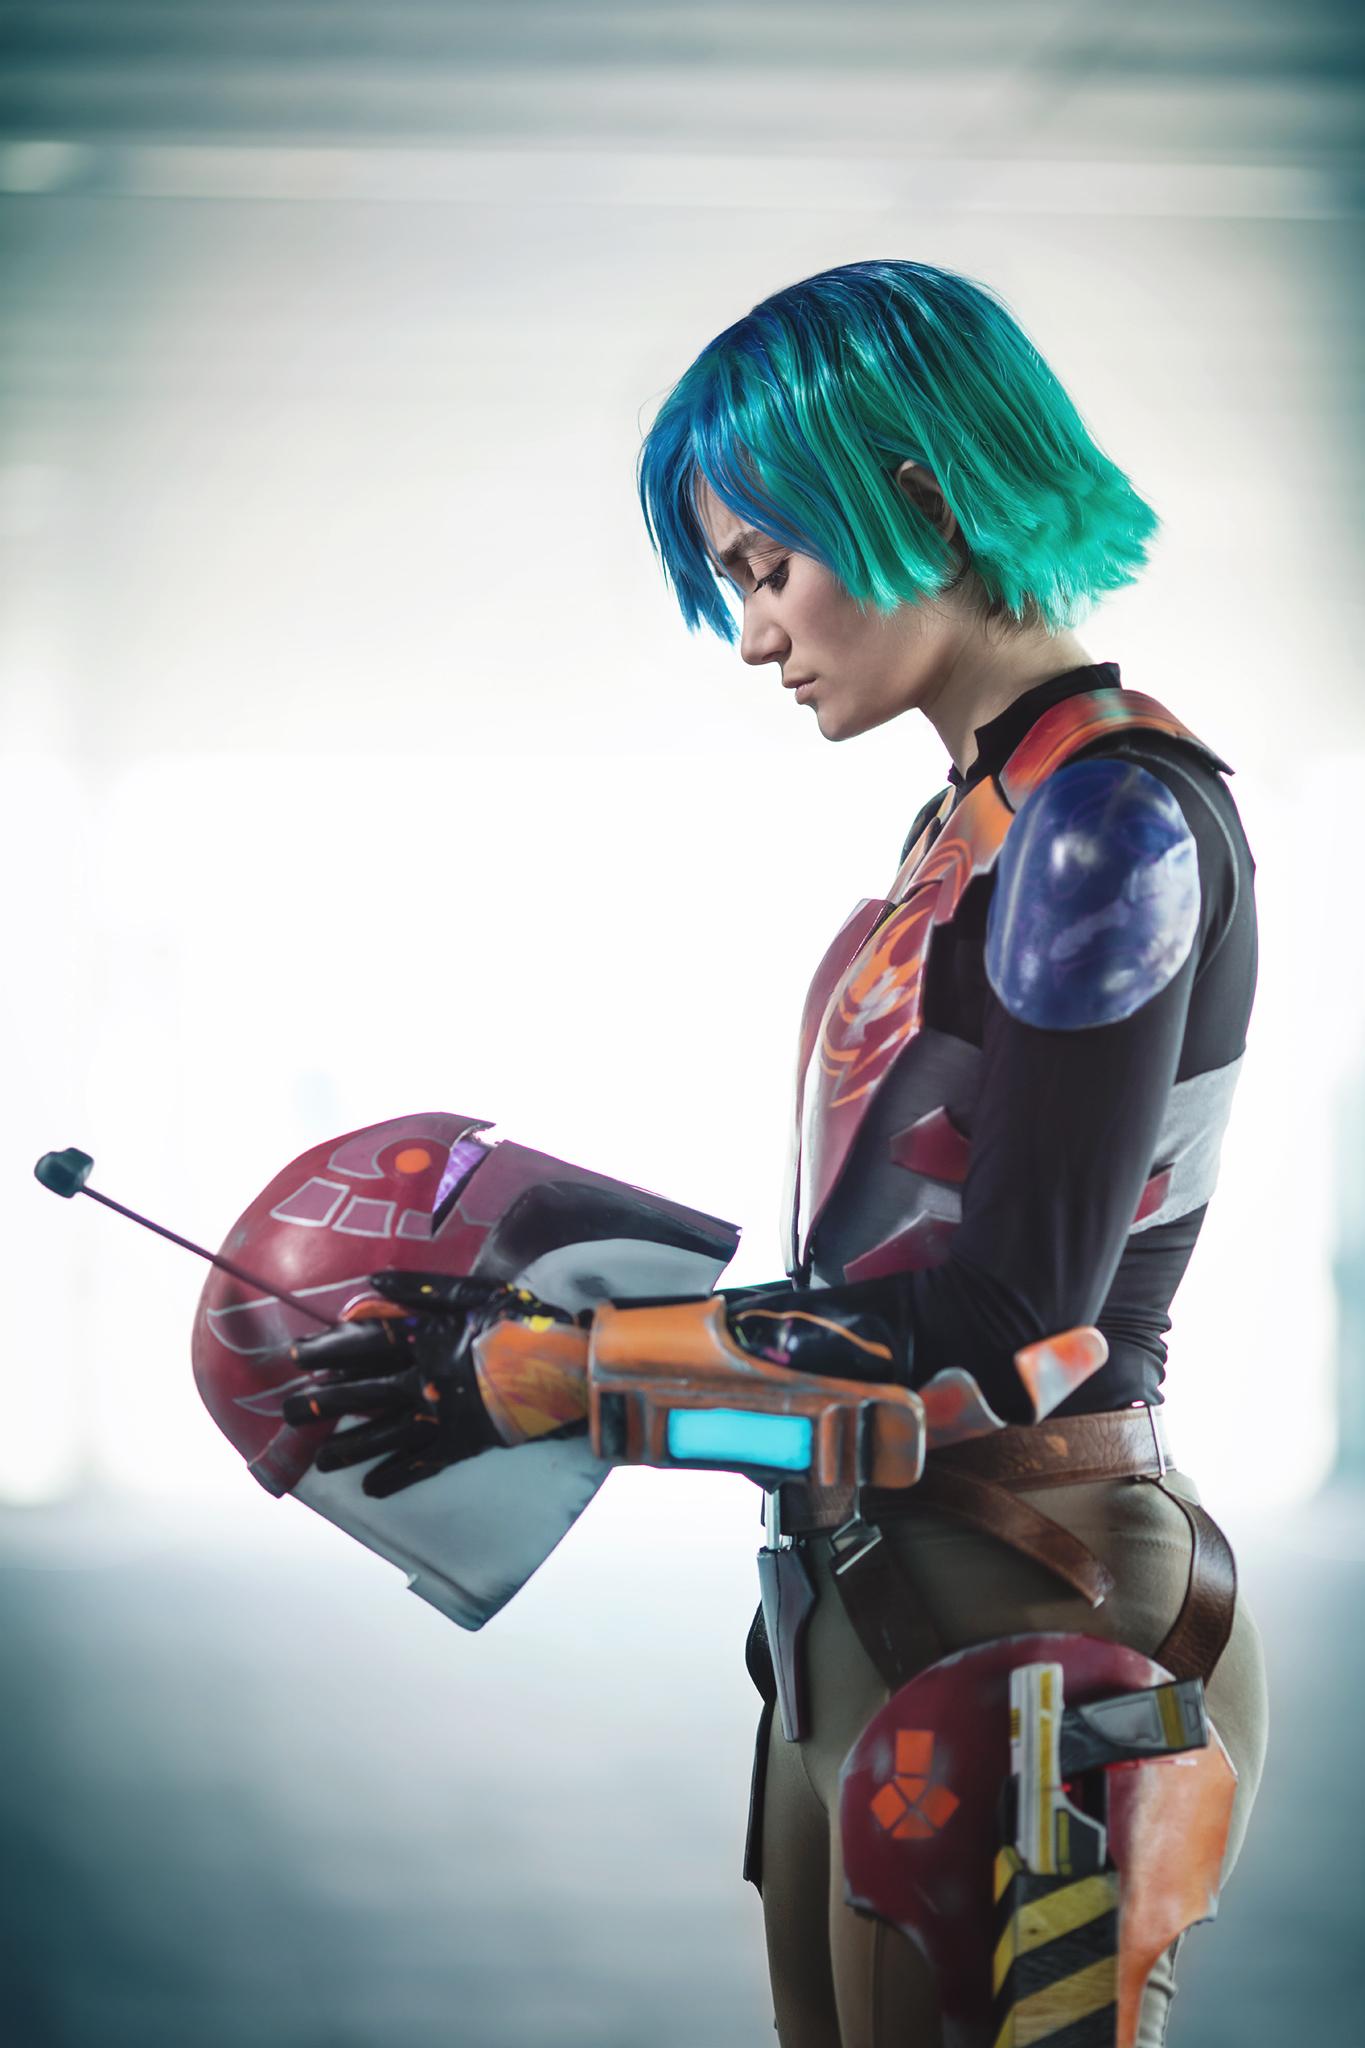 Photographer Sabine Wren cosplay from SWCE this weekend gone: cosplay